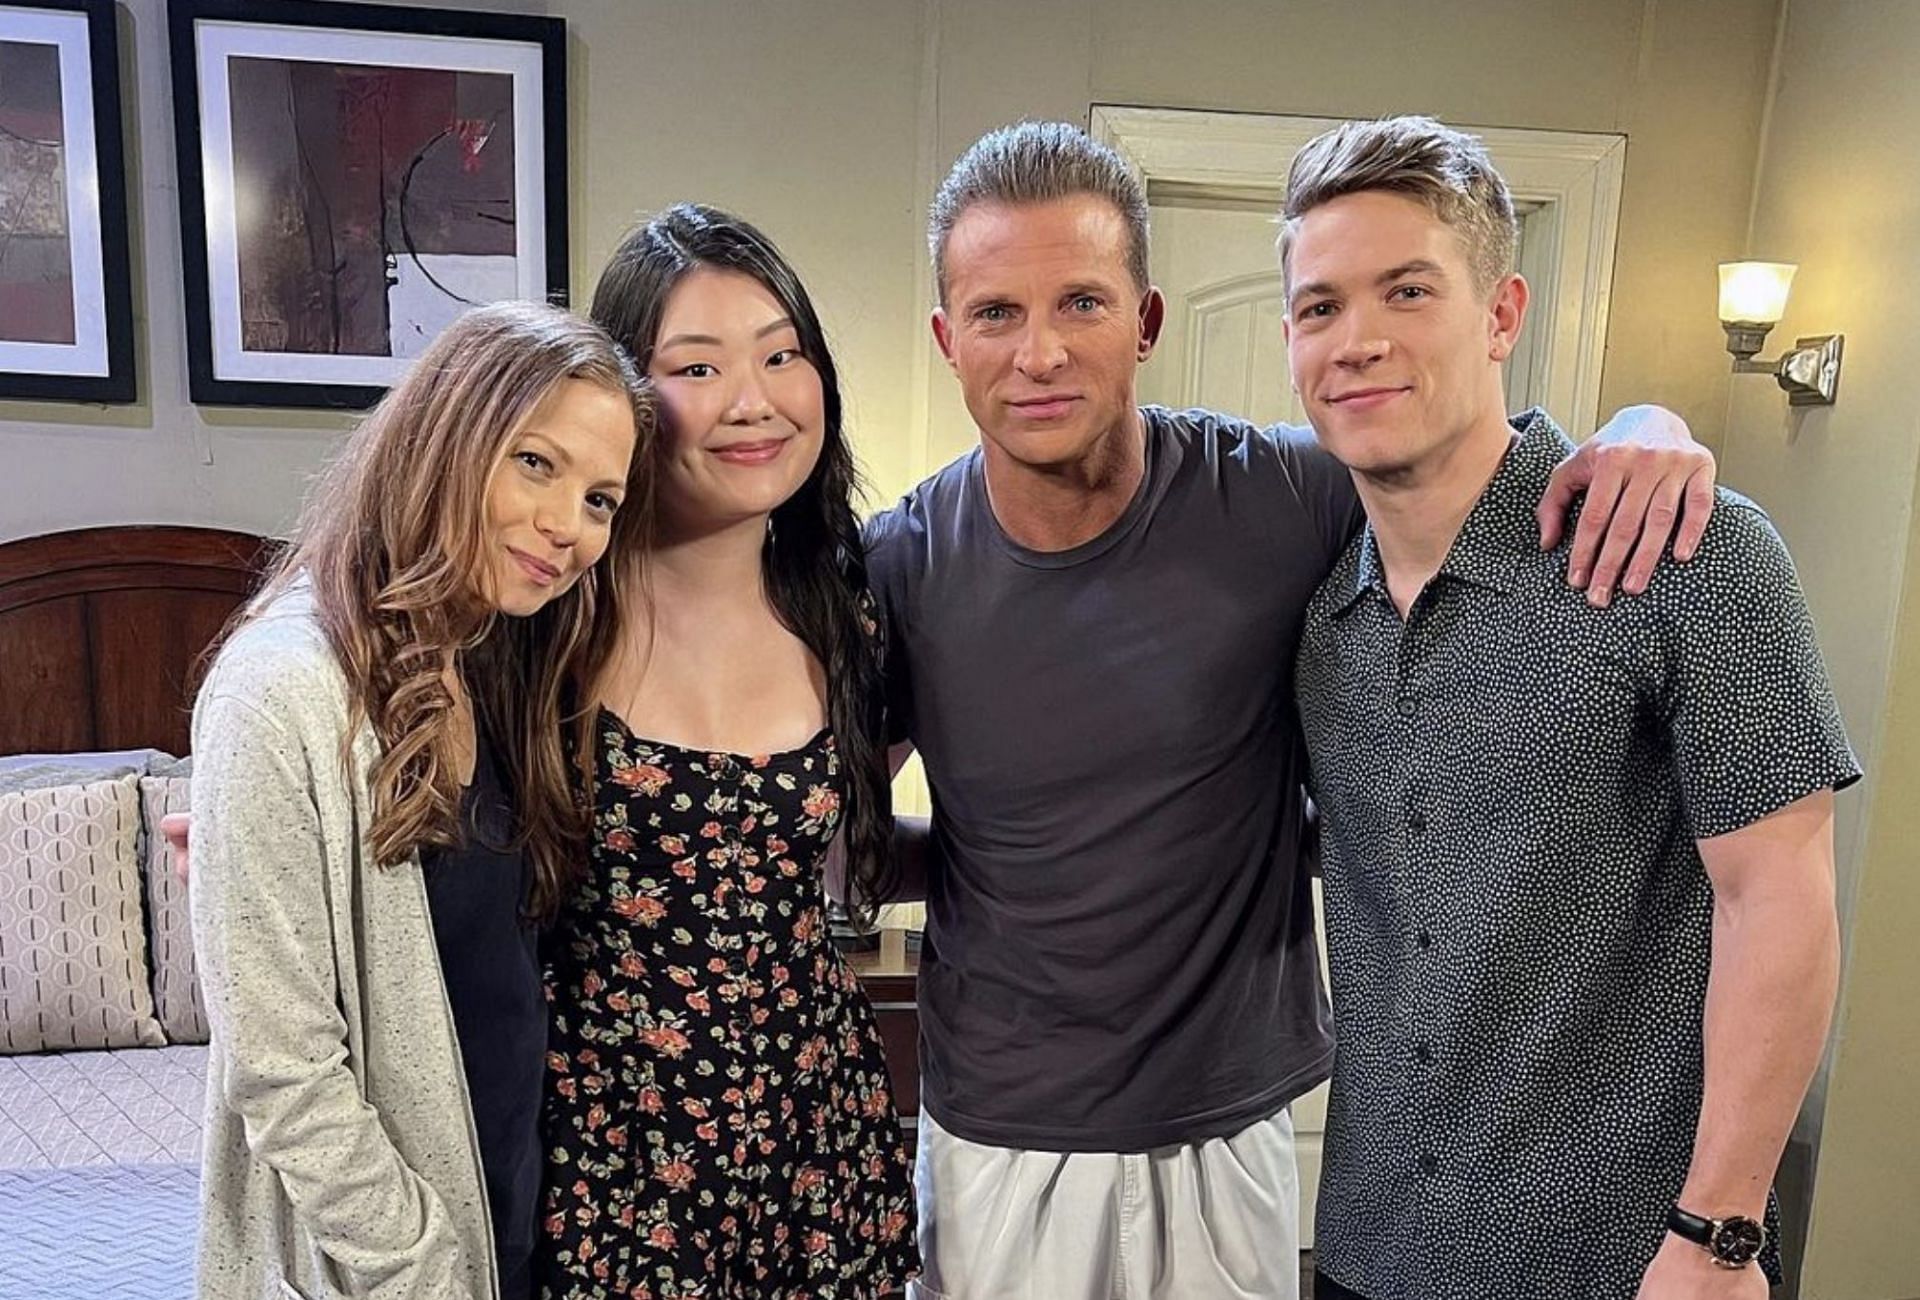 A still of the characters from Days of Our Lives. (Image via Instagram/@victoriagraceactress)